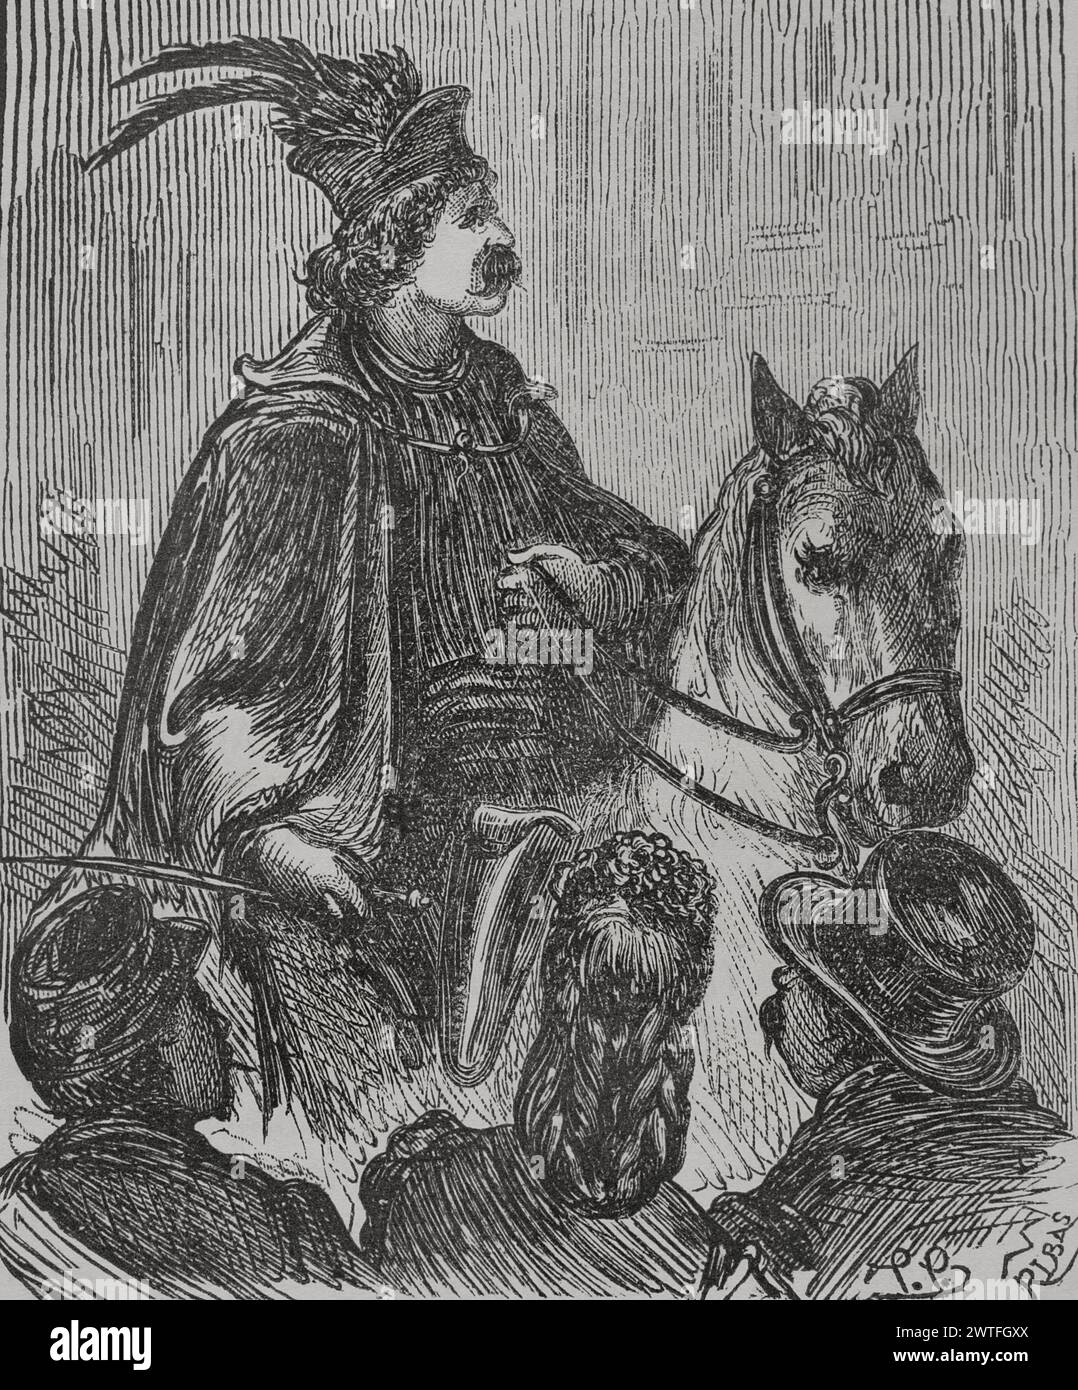 France. Paris Commune. Popular revolutionary movement that took power in Paris from 18 March to 28 May 1871, as a result of the Franco-Prussian War. Garibaldian of the Commune. Engraving by Ribas. 'Historia de la Guerra de Francia y Prusia' (History of the War between France and Prussia). Volume II. Published in Barcelona, 1871. Stock Photo